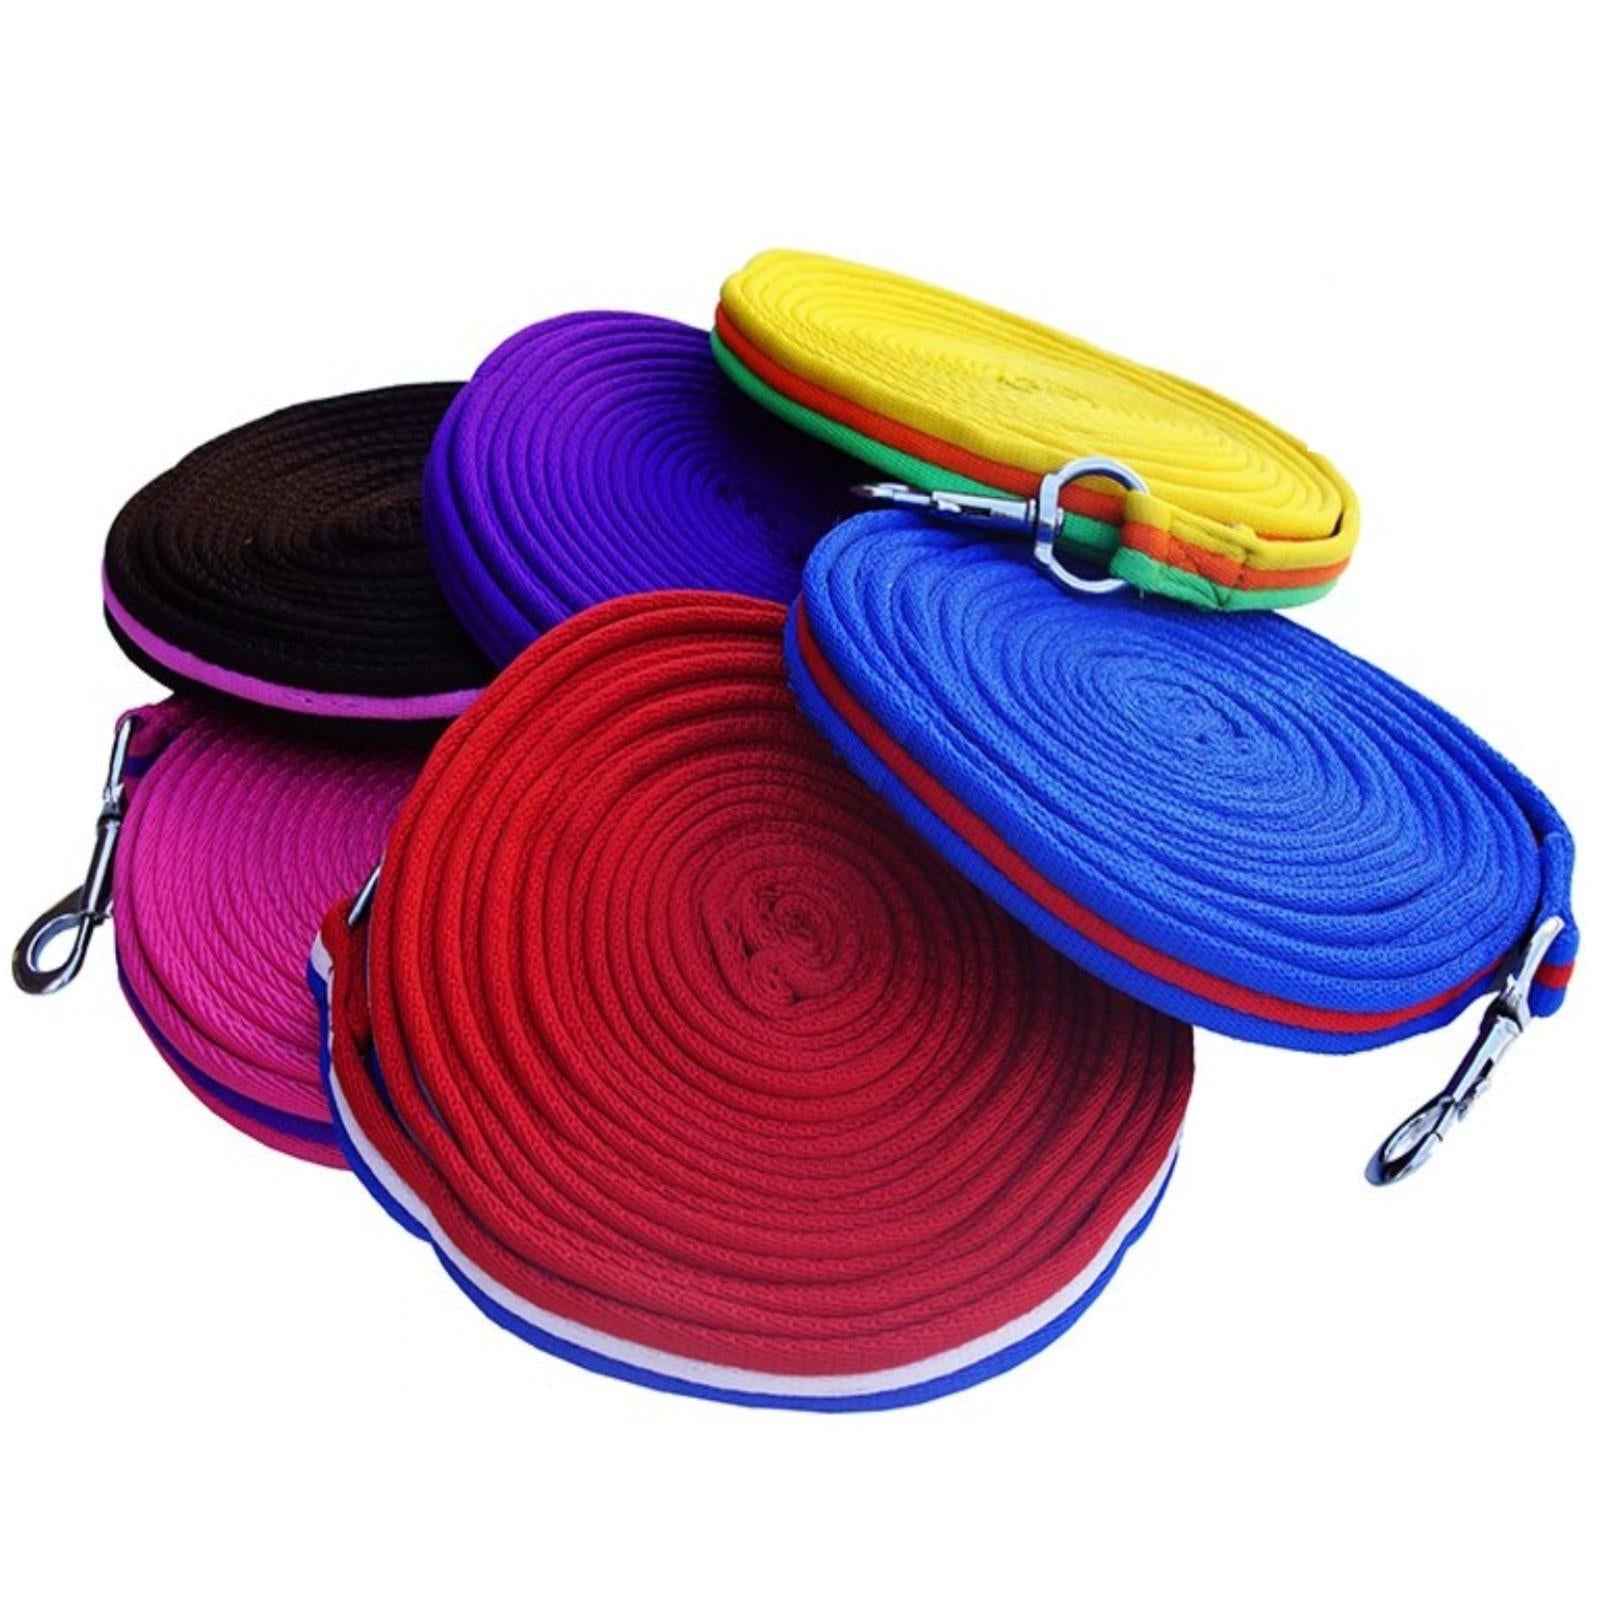 4 Metre Soft Padded Lunging Rein Pony Horse Training Long Lunge Line 22 Colours